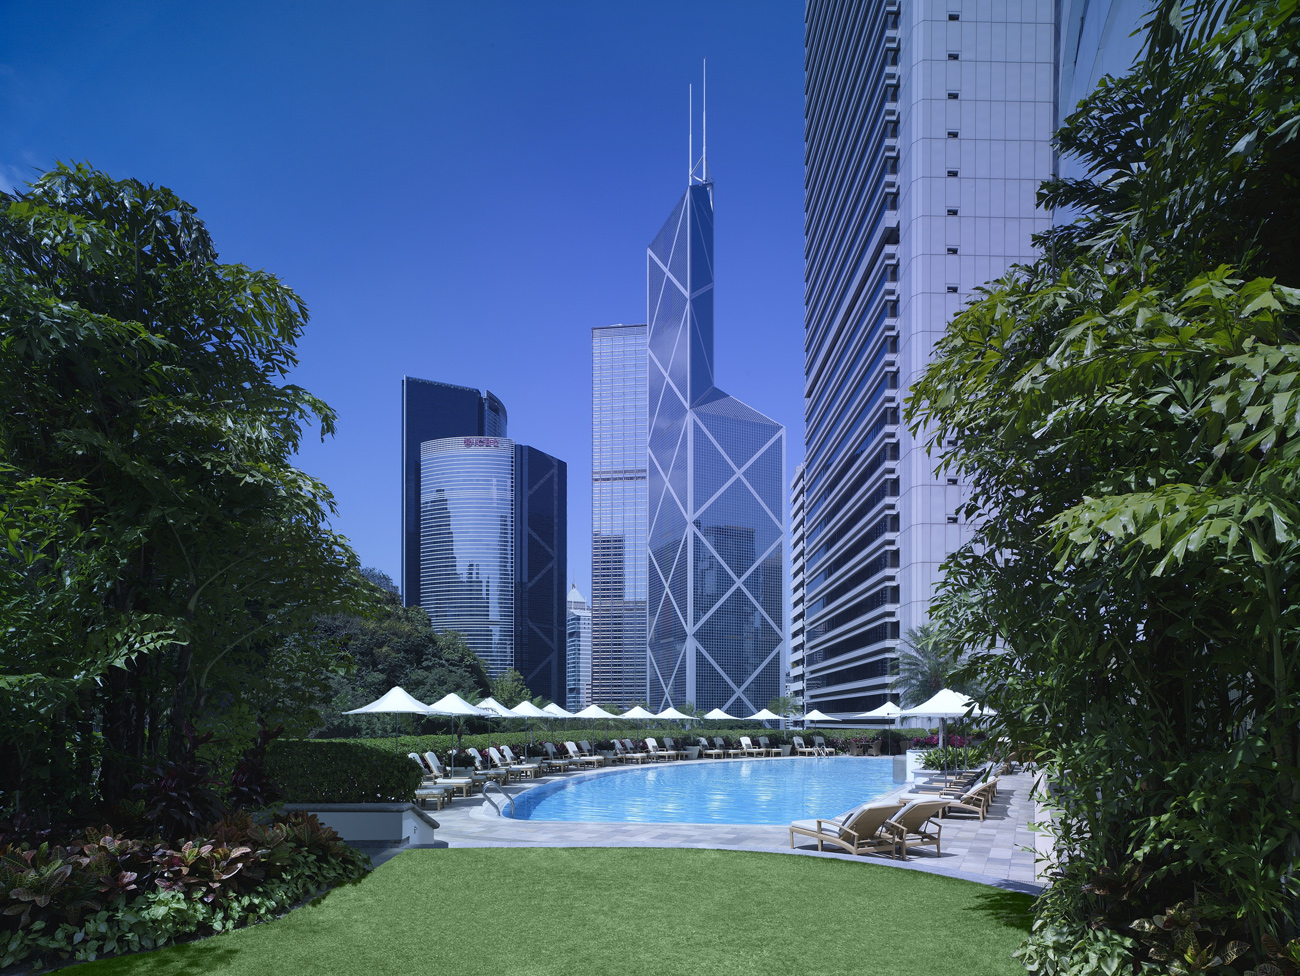 The stunning view from the Island Shangri-La Hong Kong hotel swimming pool